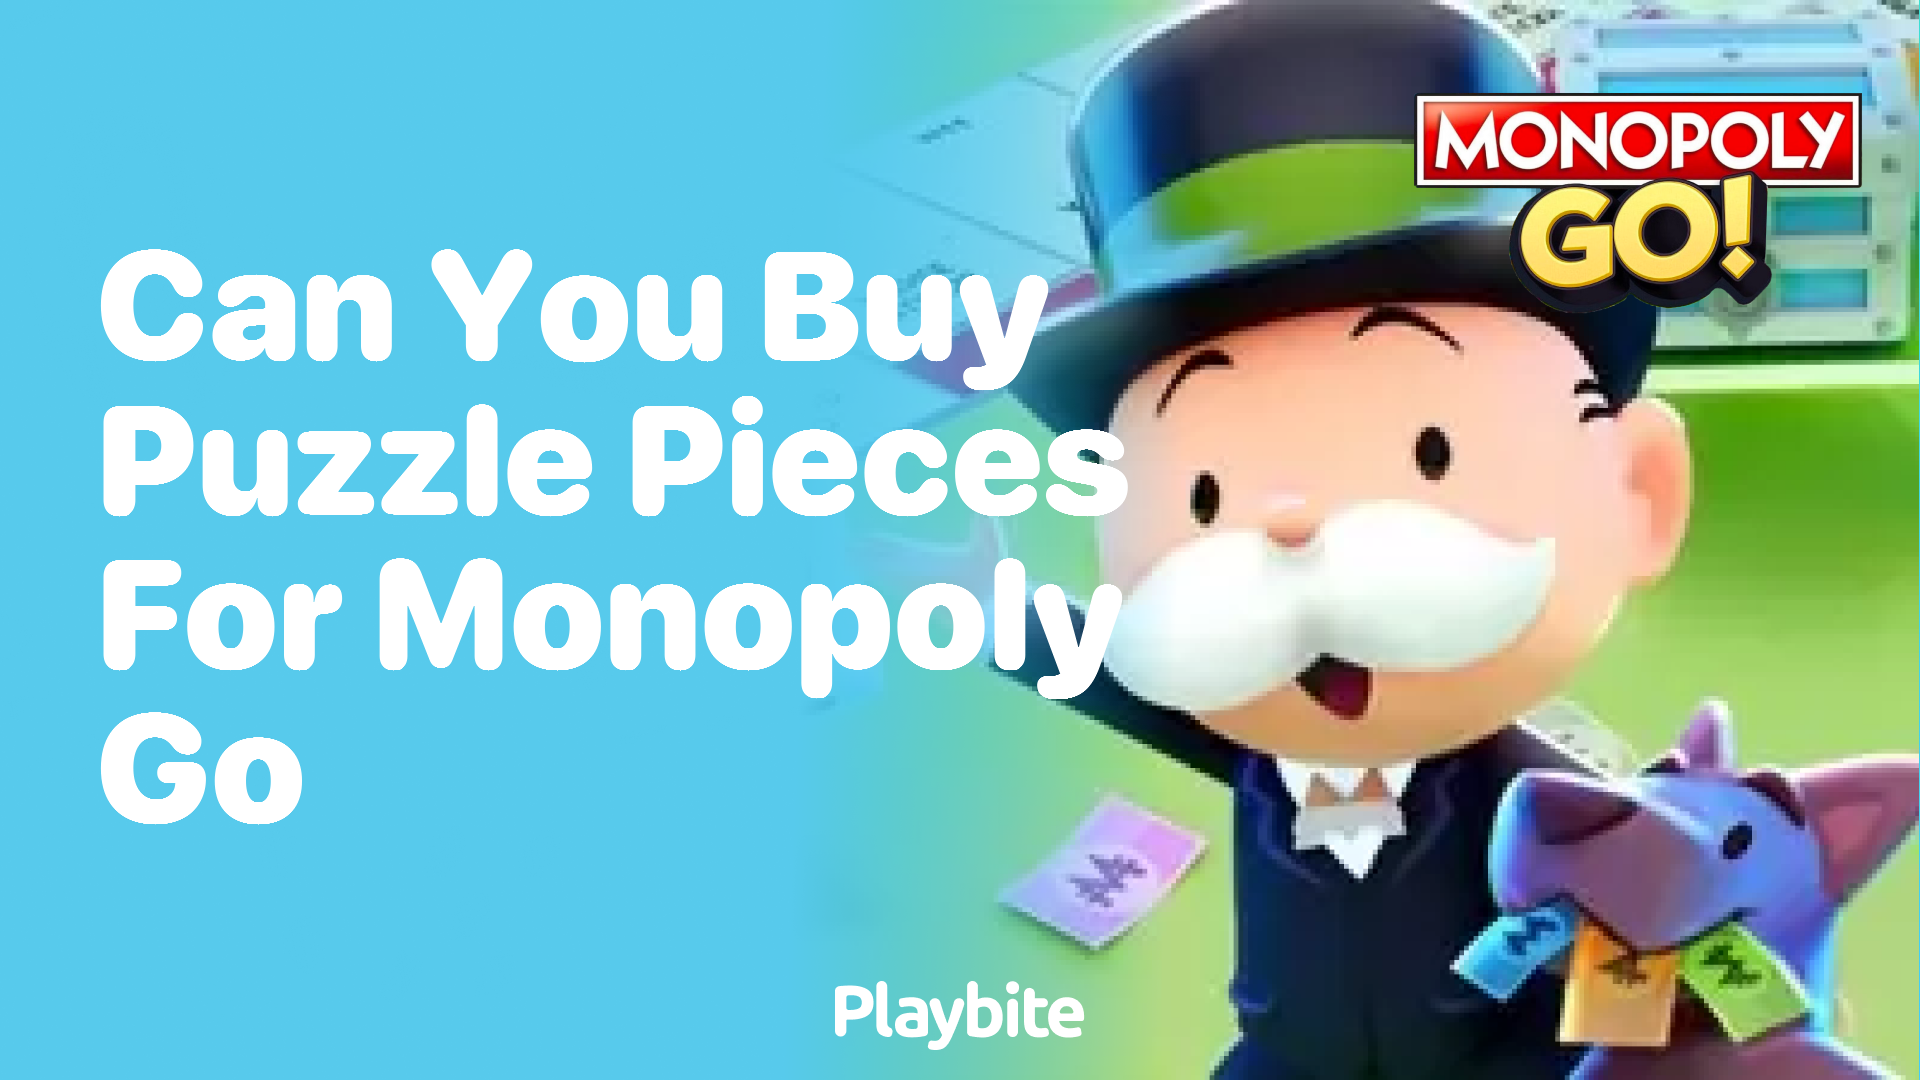 Can You Buy Puzzle Pieces for Monopoly Go?